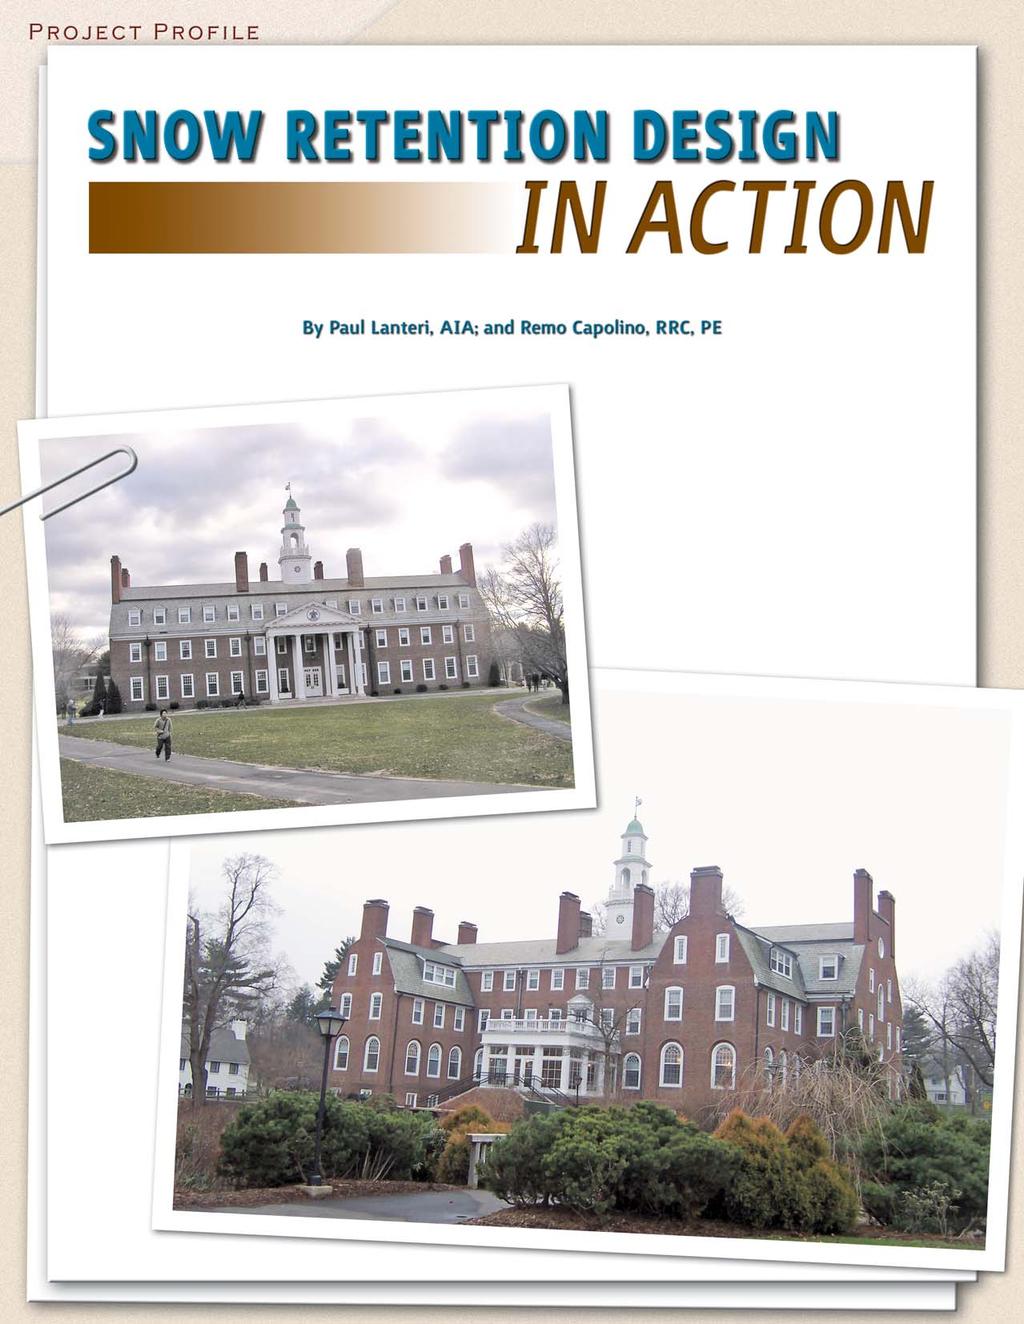 A private school in a picturesque New England town is the setting for our first case study in snow retention.